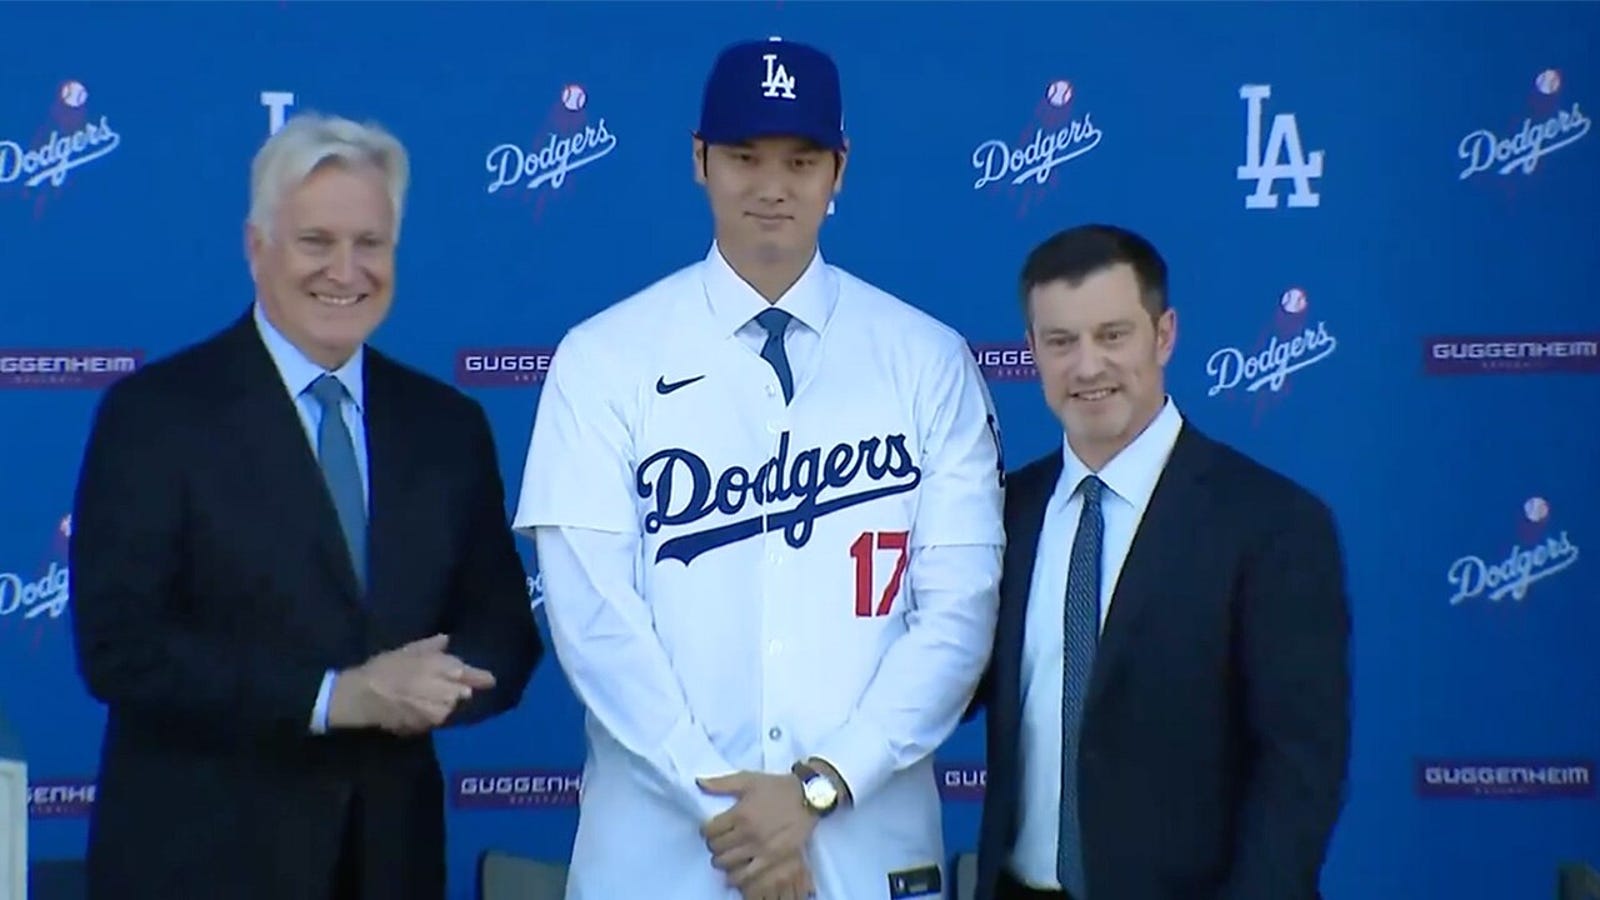 Ohtani puts on Dodgers jersey for first time at introductory conference